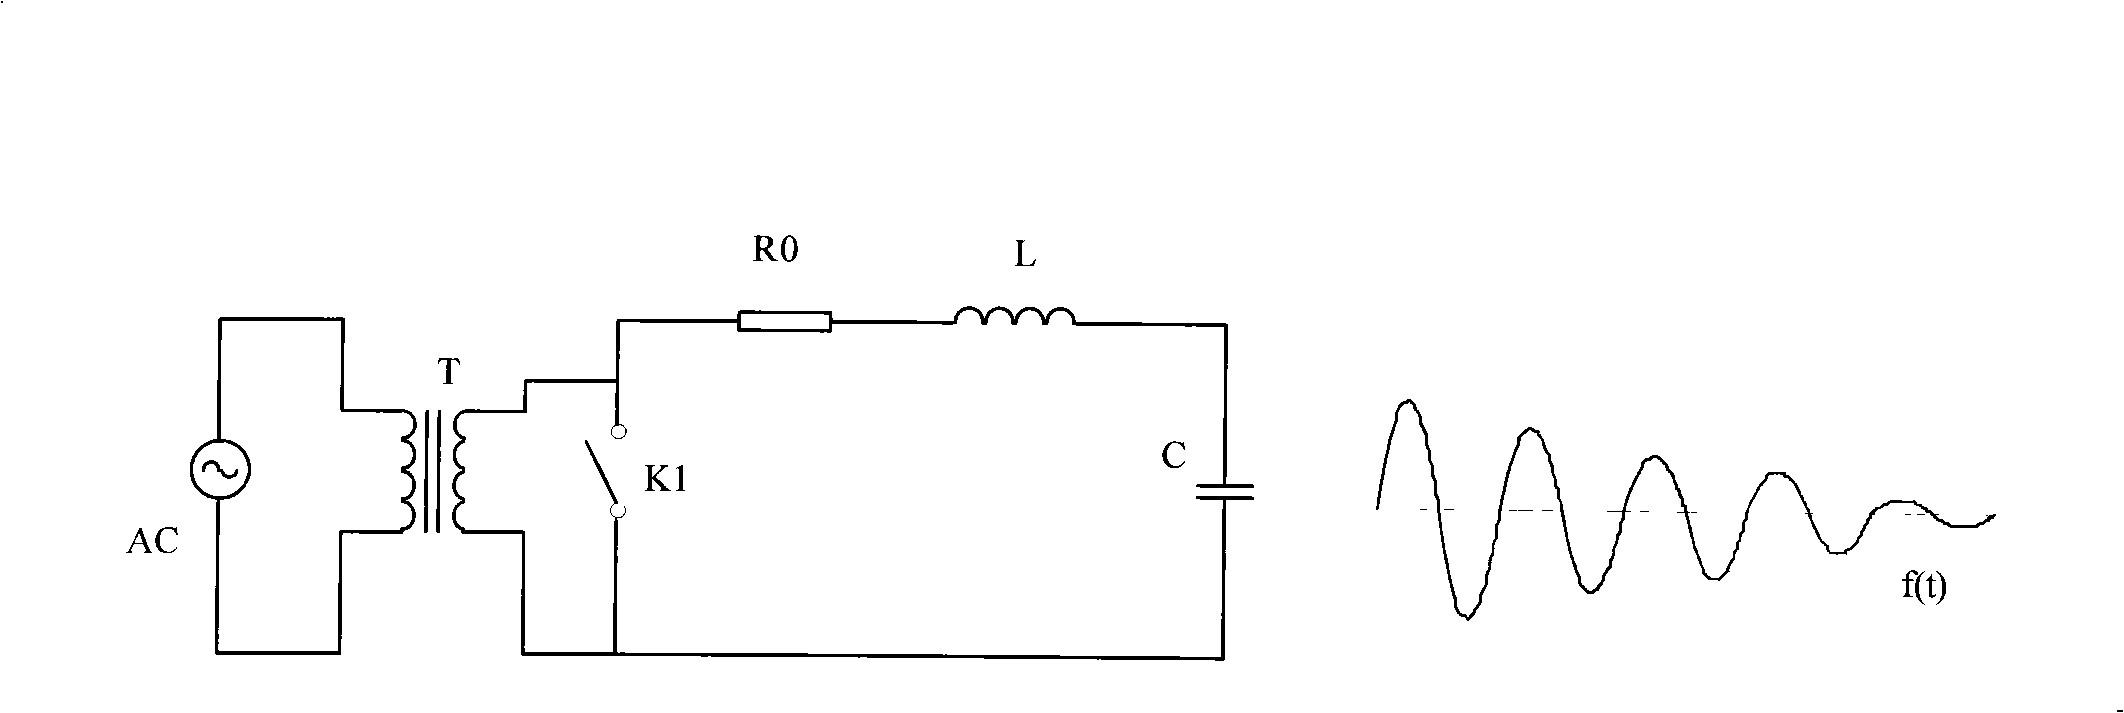 Apparatus for generating oscillating wave for electrical apparatus test